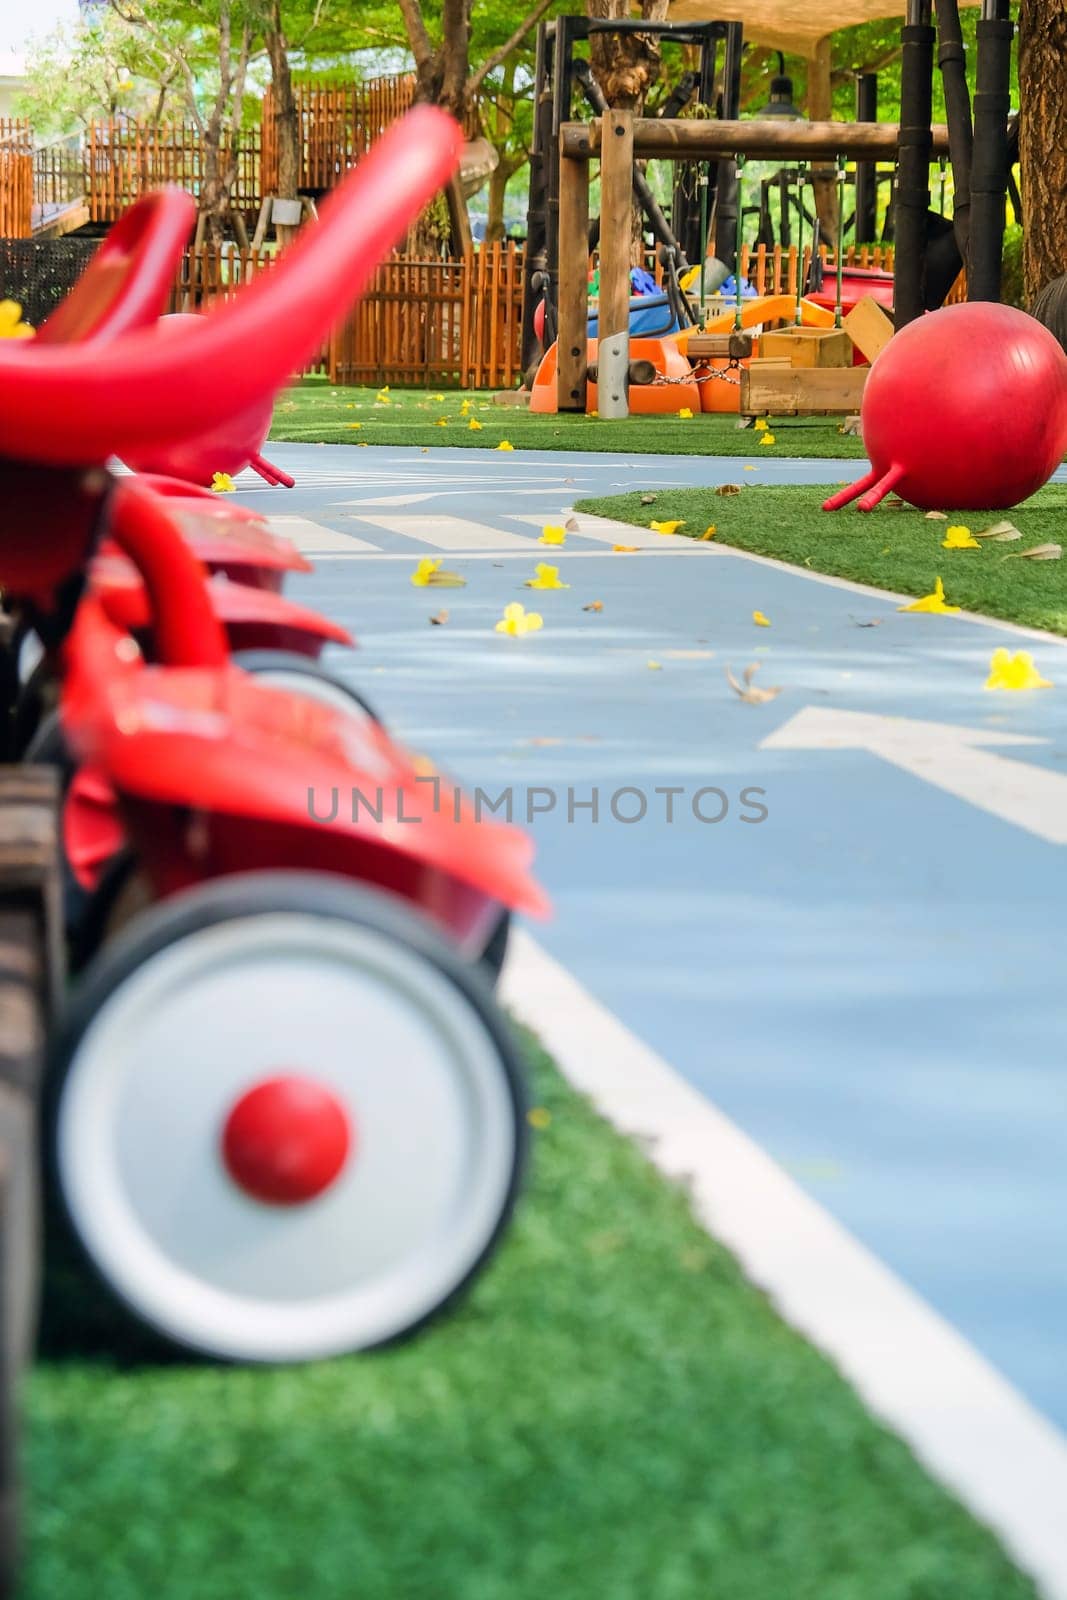 Playground with red toy car on green grass field in public park by ponsulak